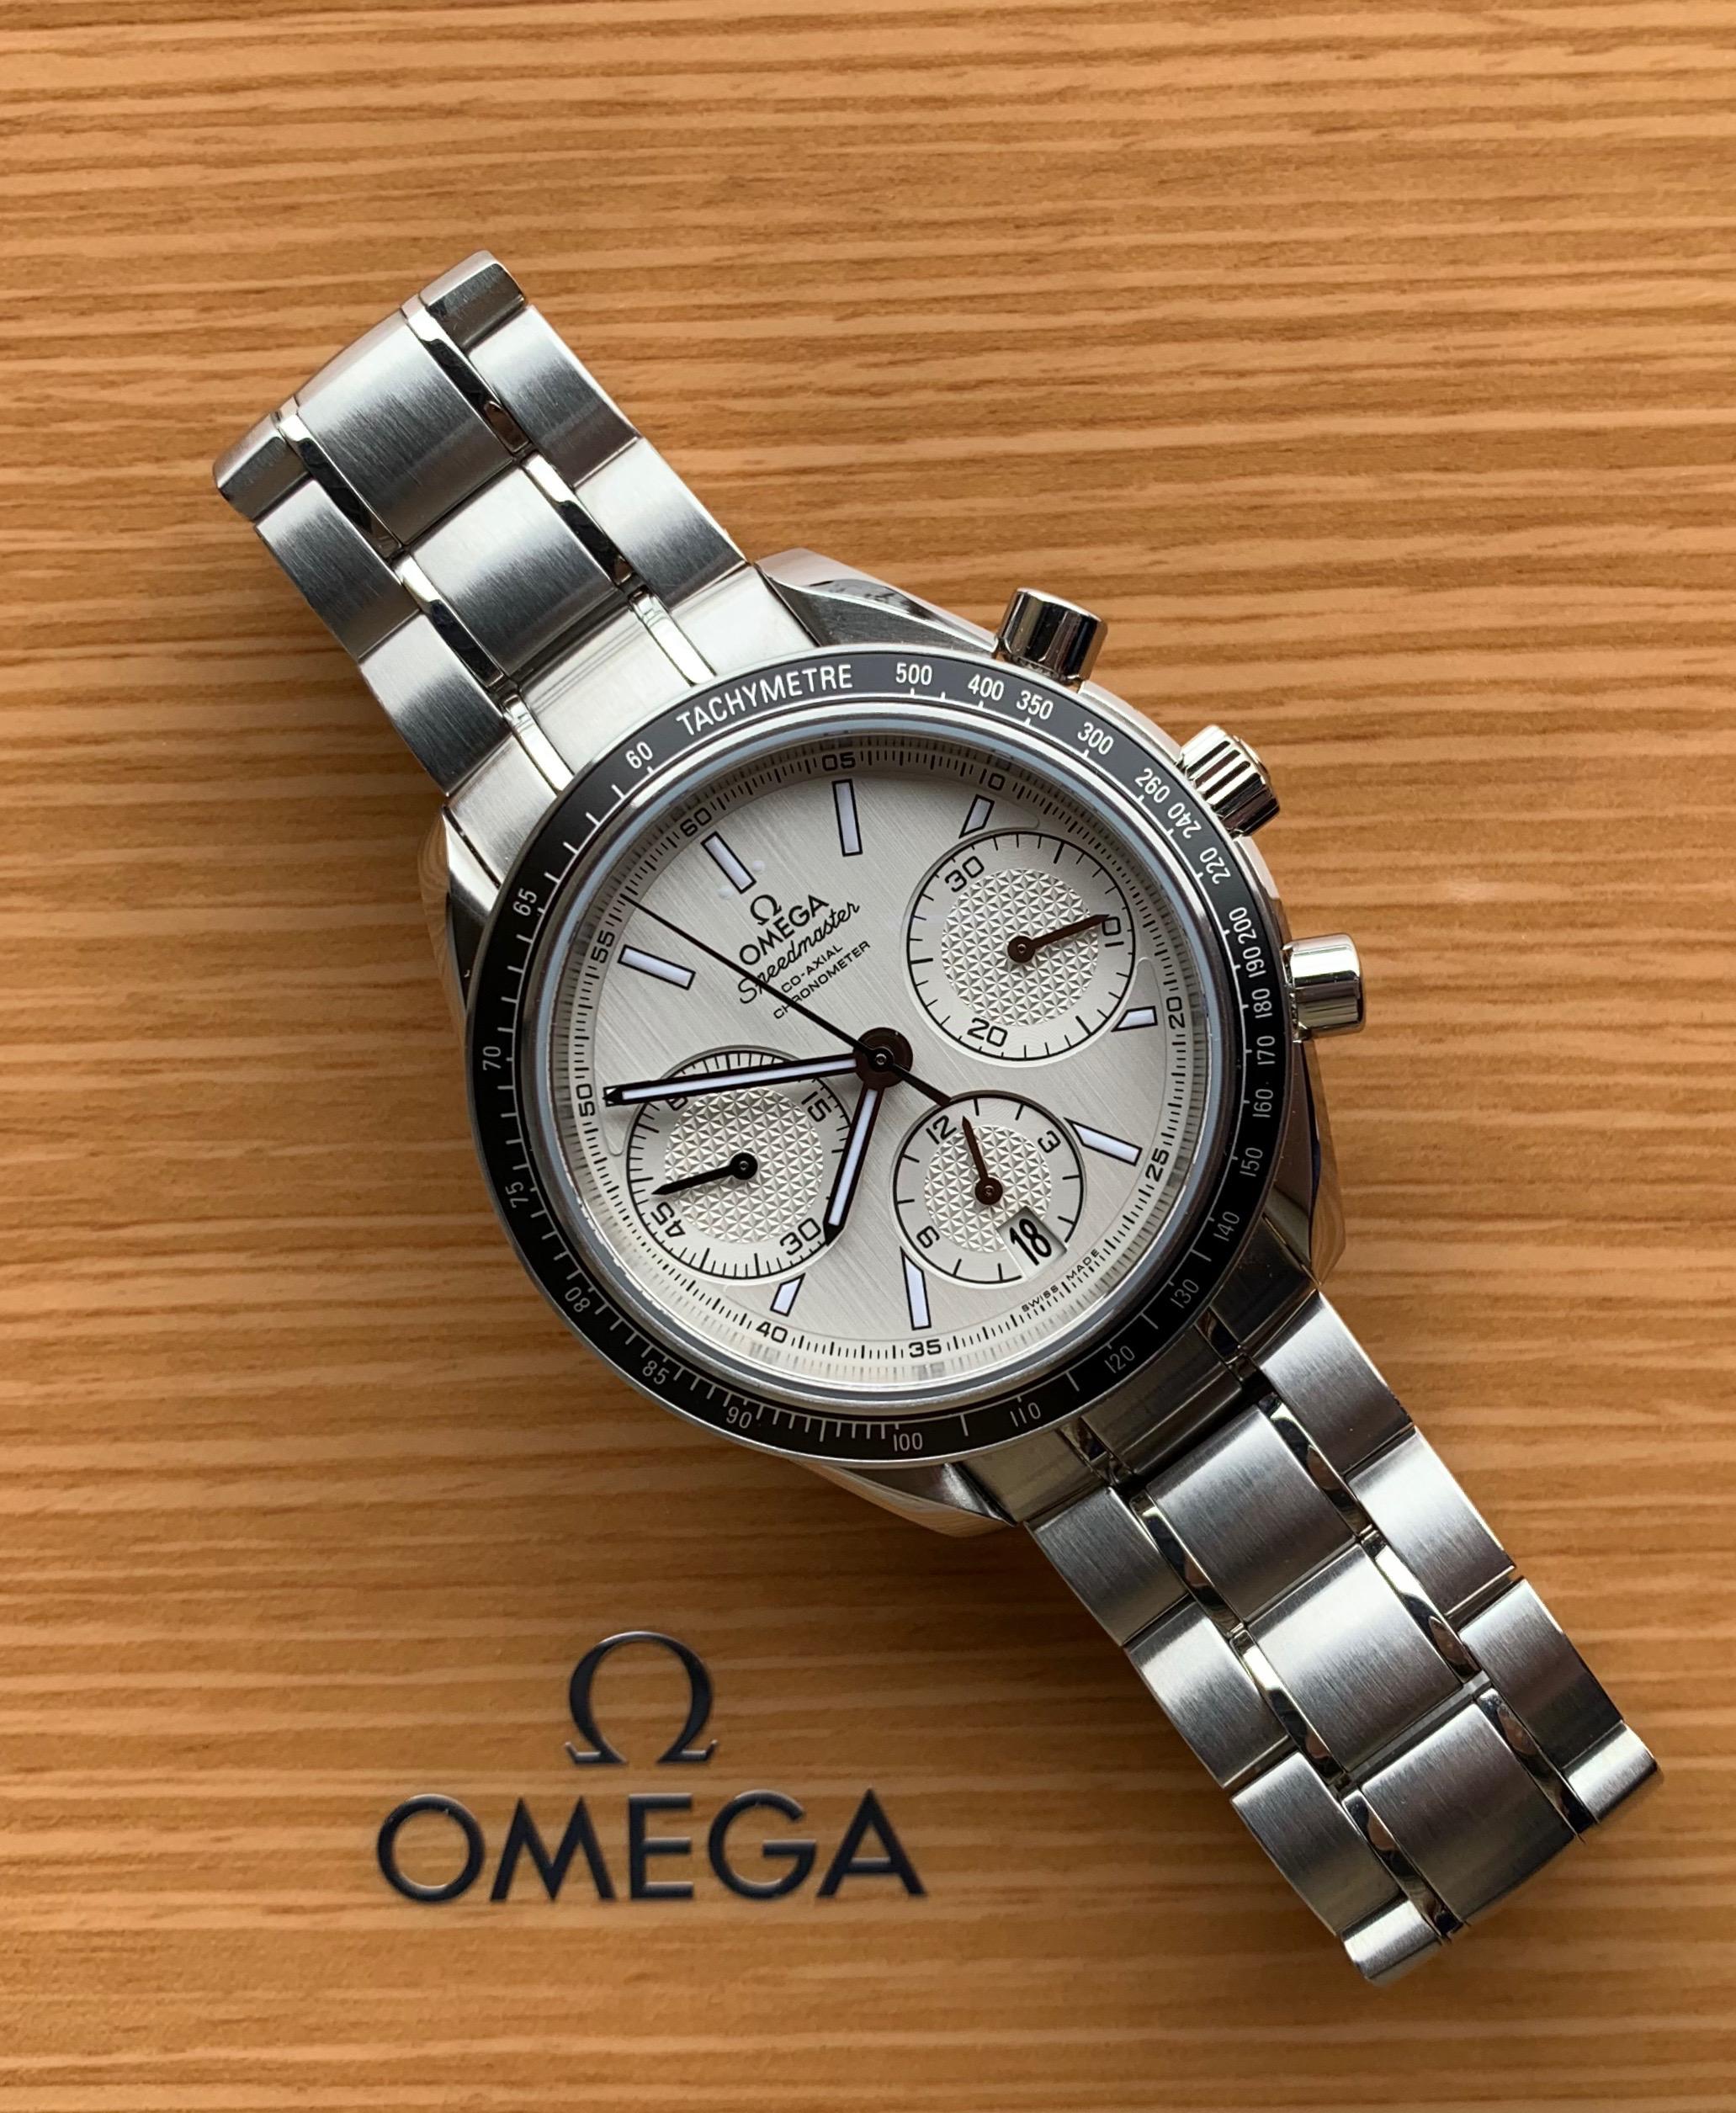 Omega Speedmaster Racing: Perfect for the Avid Racer